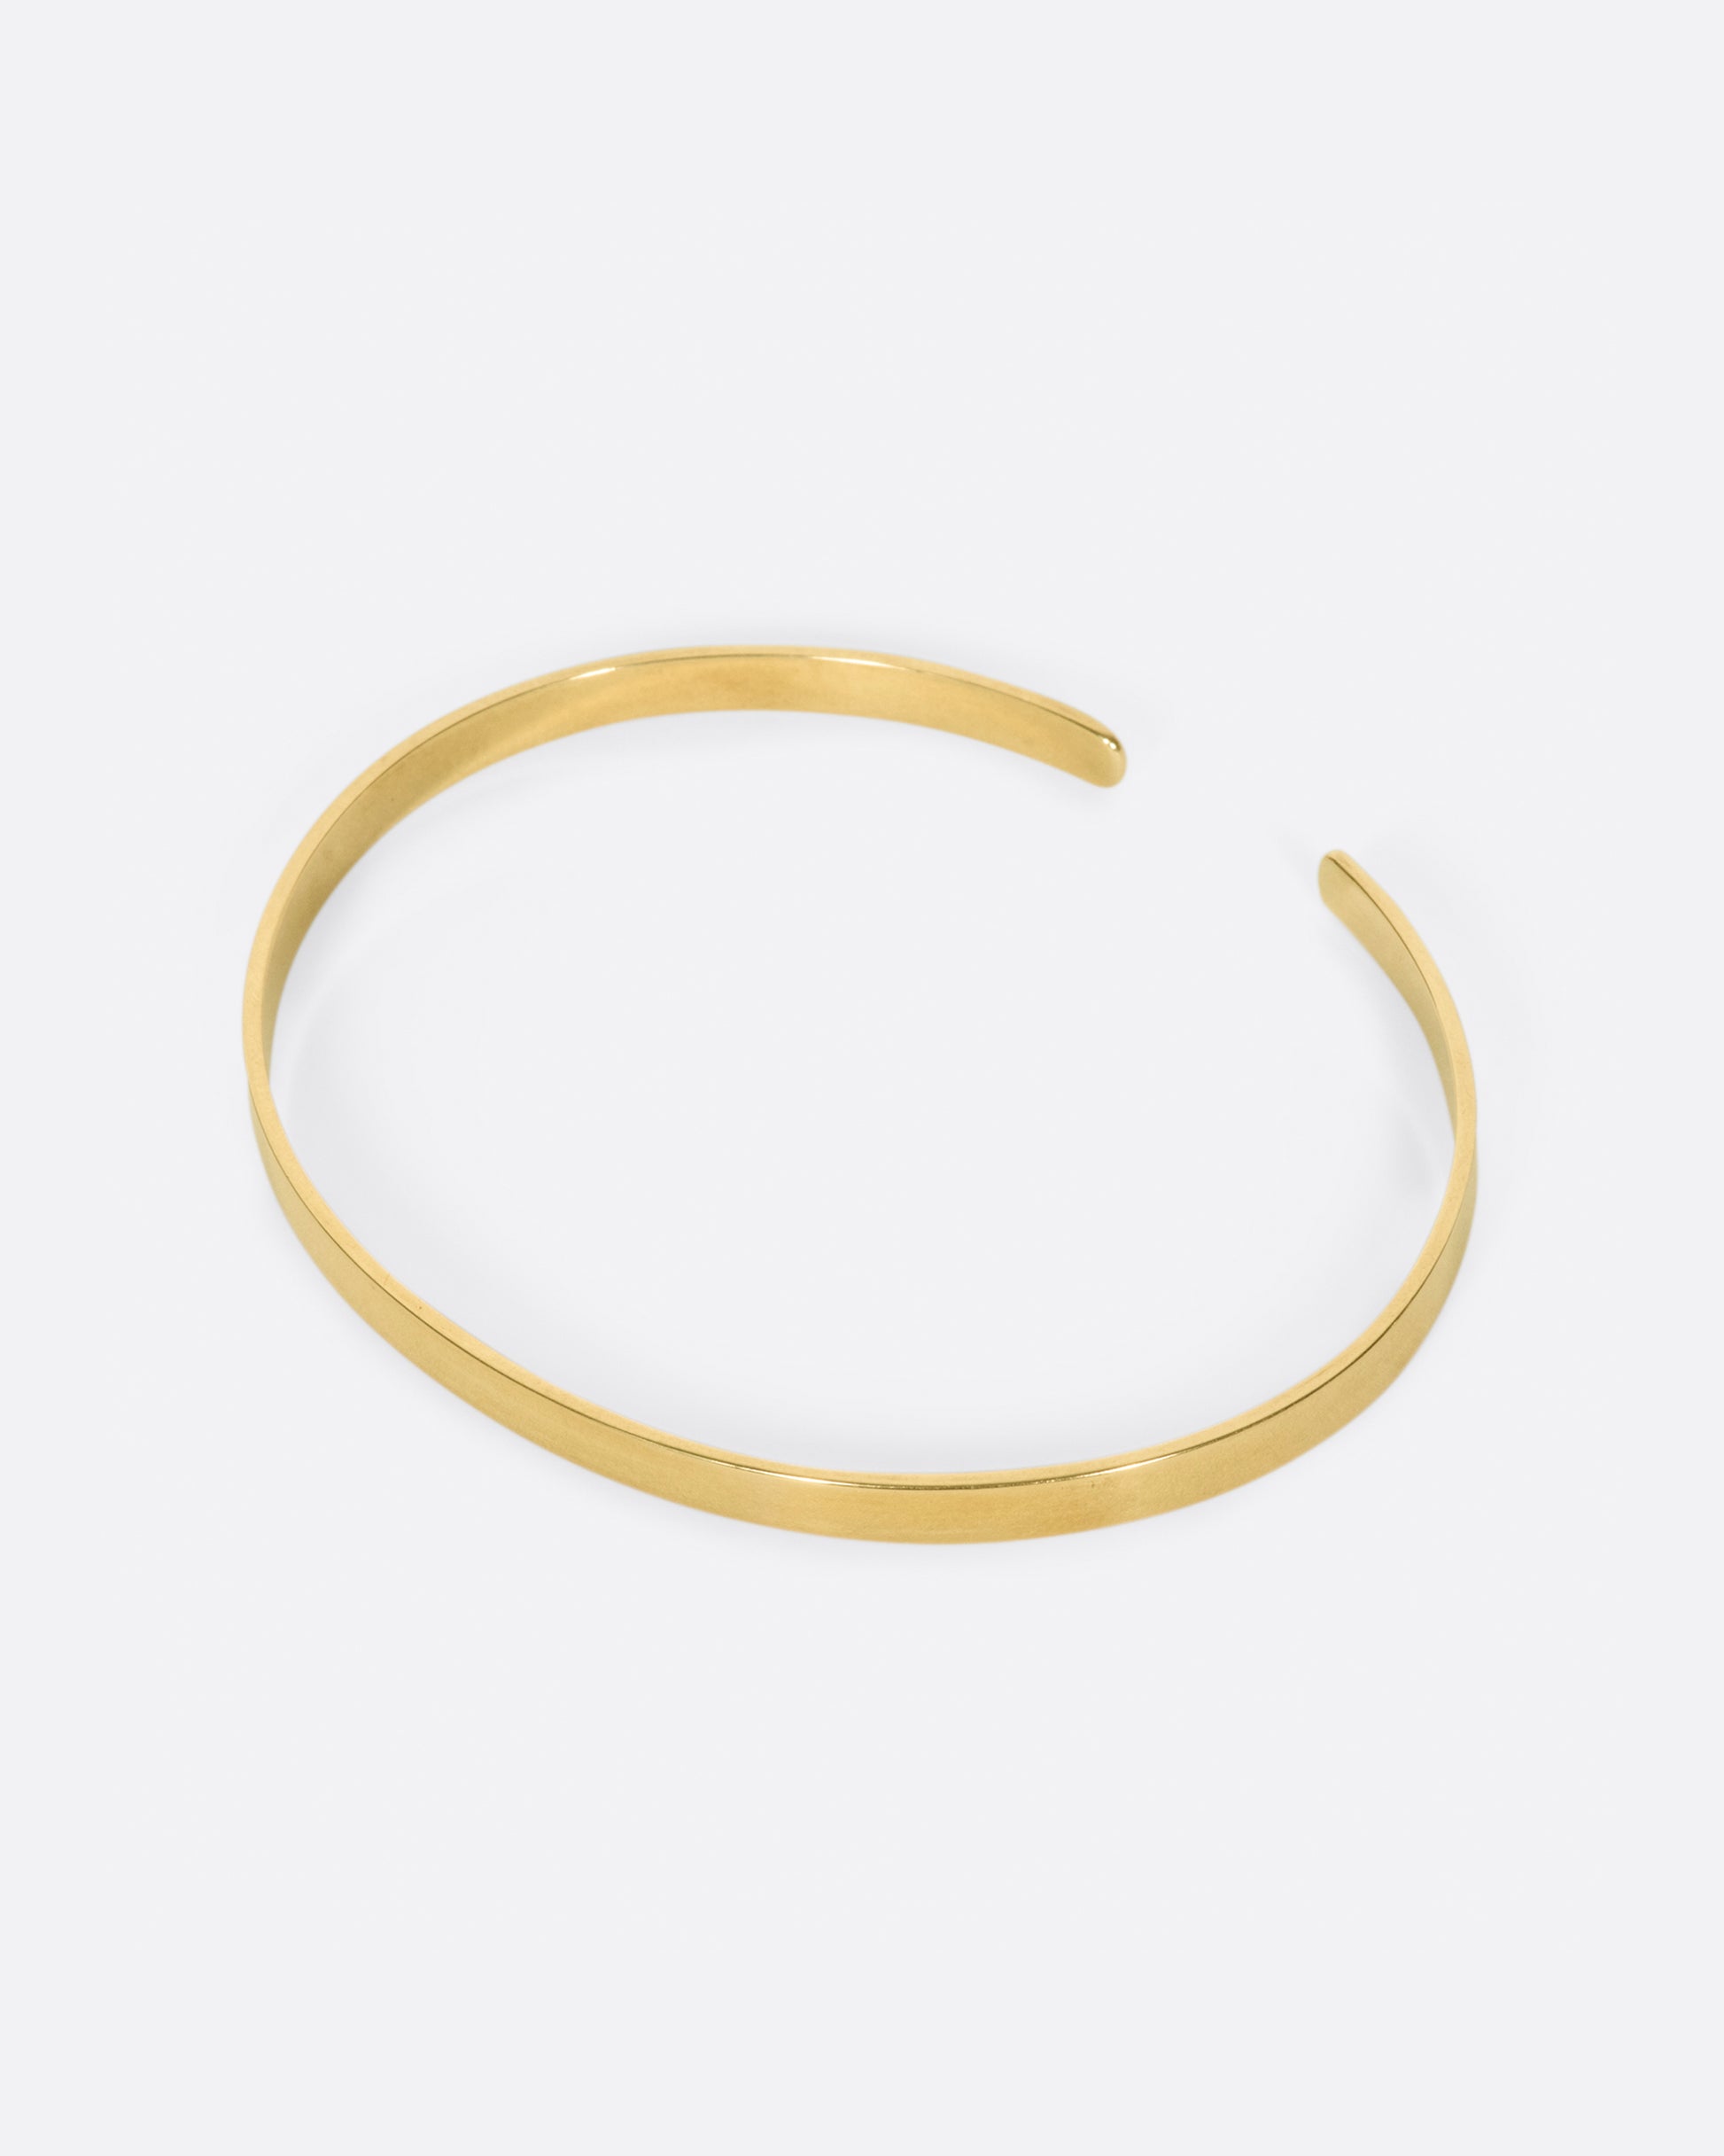 A flat ribbon of gold that looks like a bangle if you wear it face down, but still has all of the flexibility of a cuff.